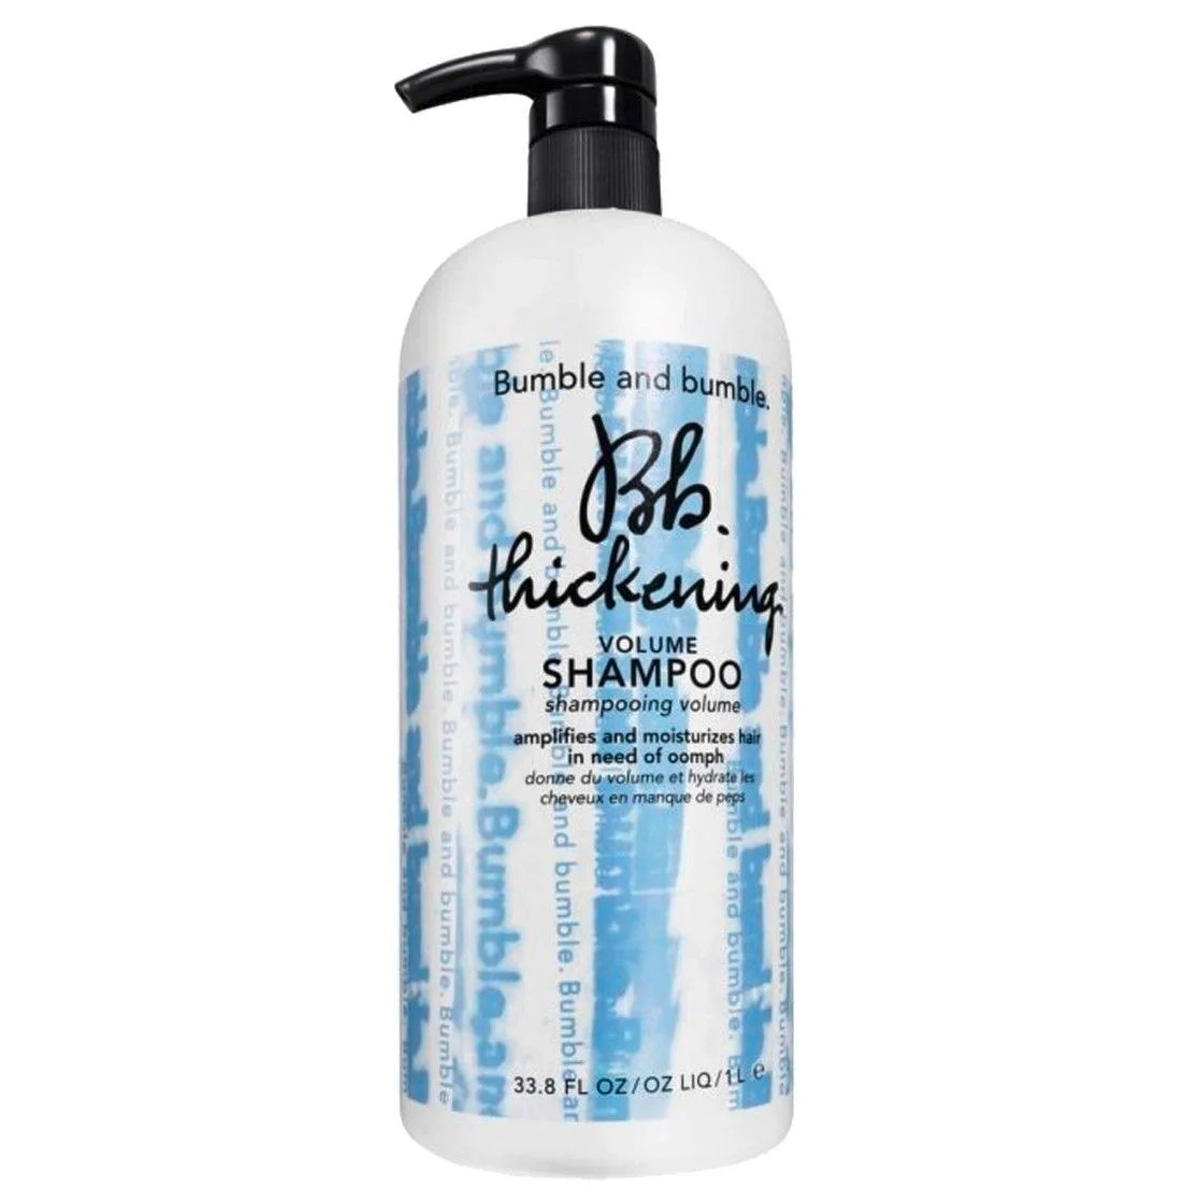 Bumble and bumble Thickening Shampoo 1 litre - 1